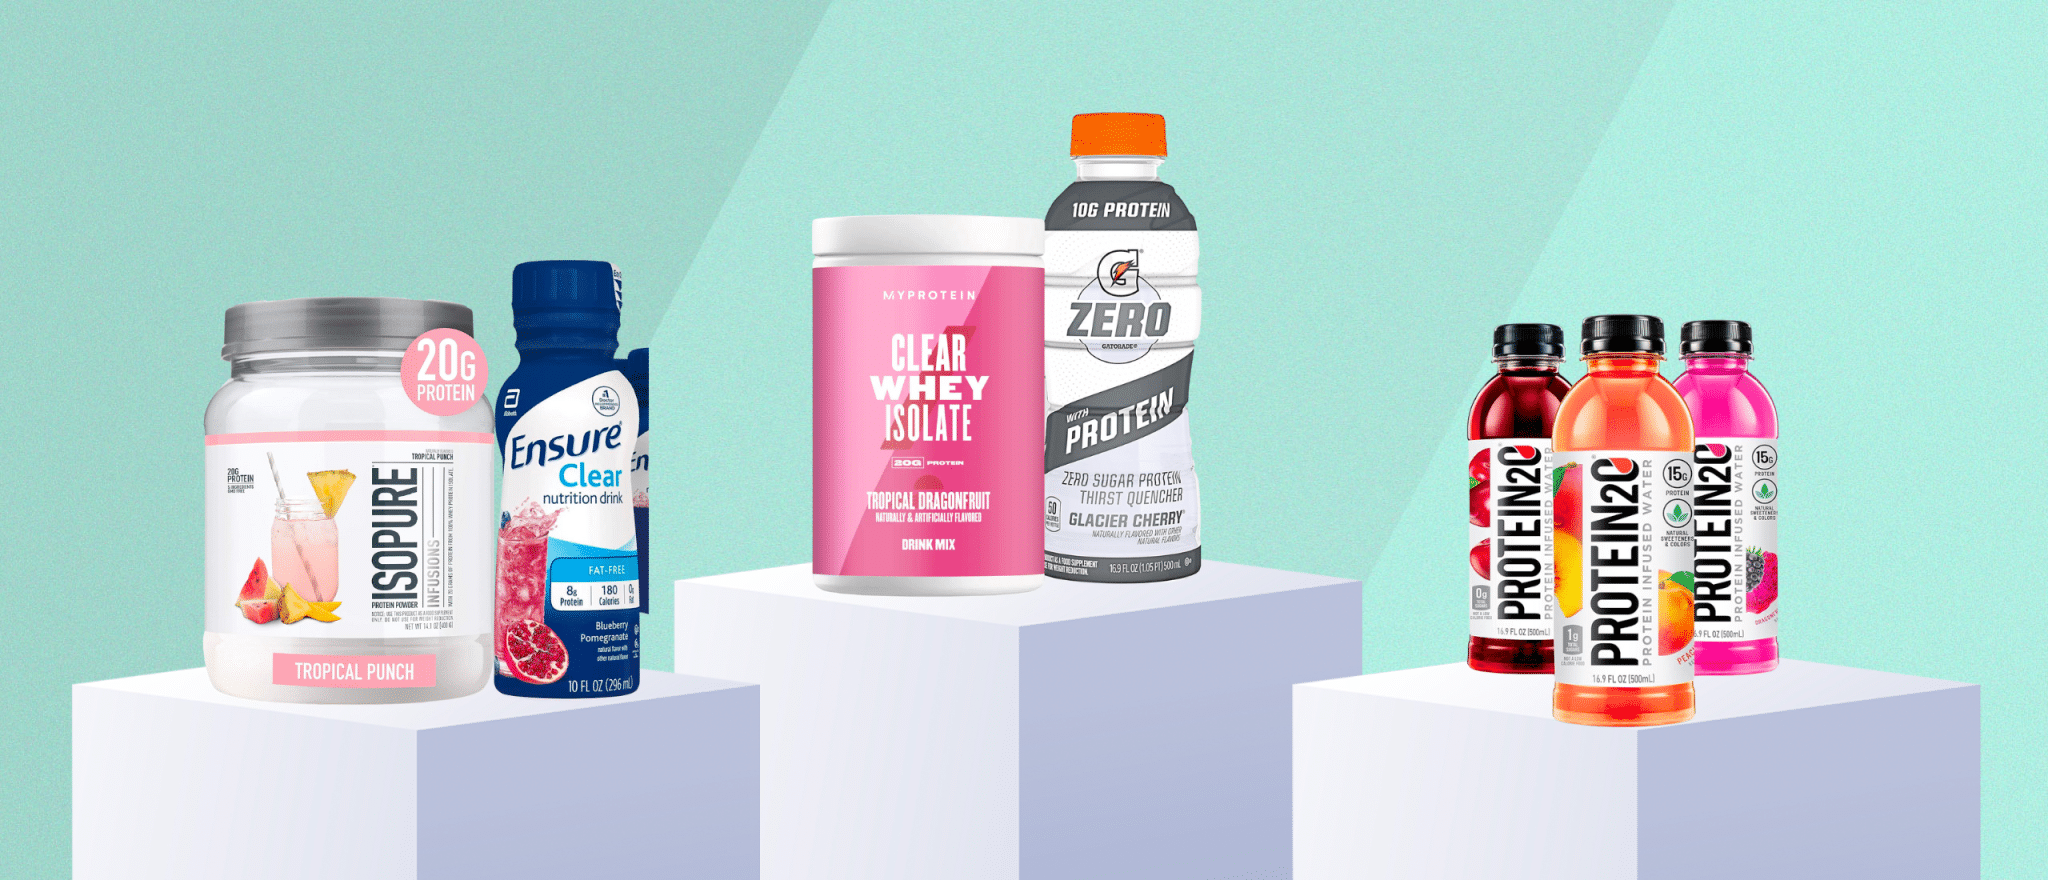 Looking for a Lighter Protein Drink? Try the Best Clear Whey Protein Drinks